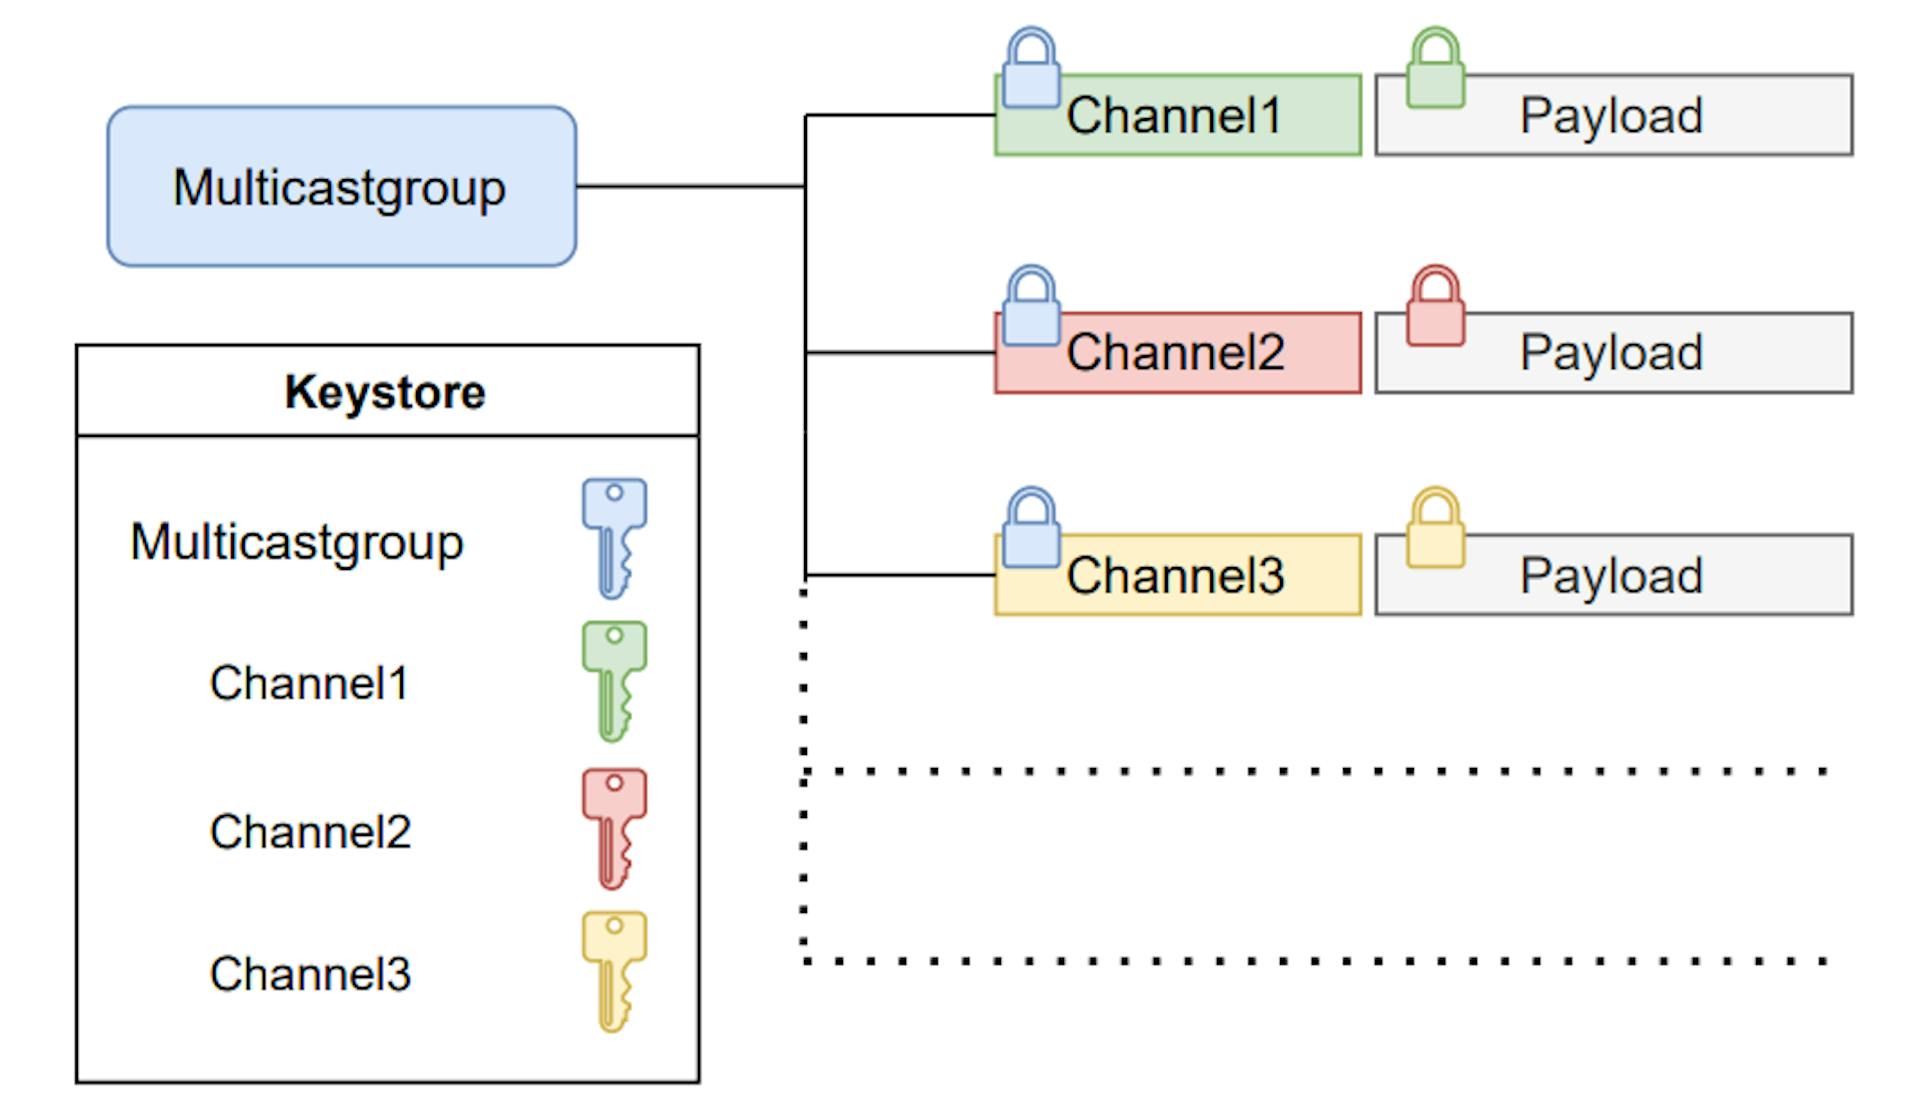 Fig. 3. Hierarchical encryption of channelname and payload in LCMsec